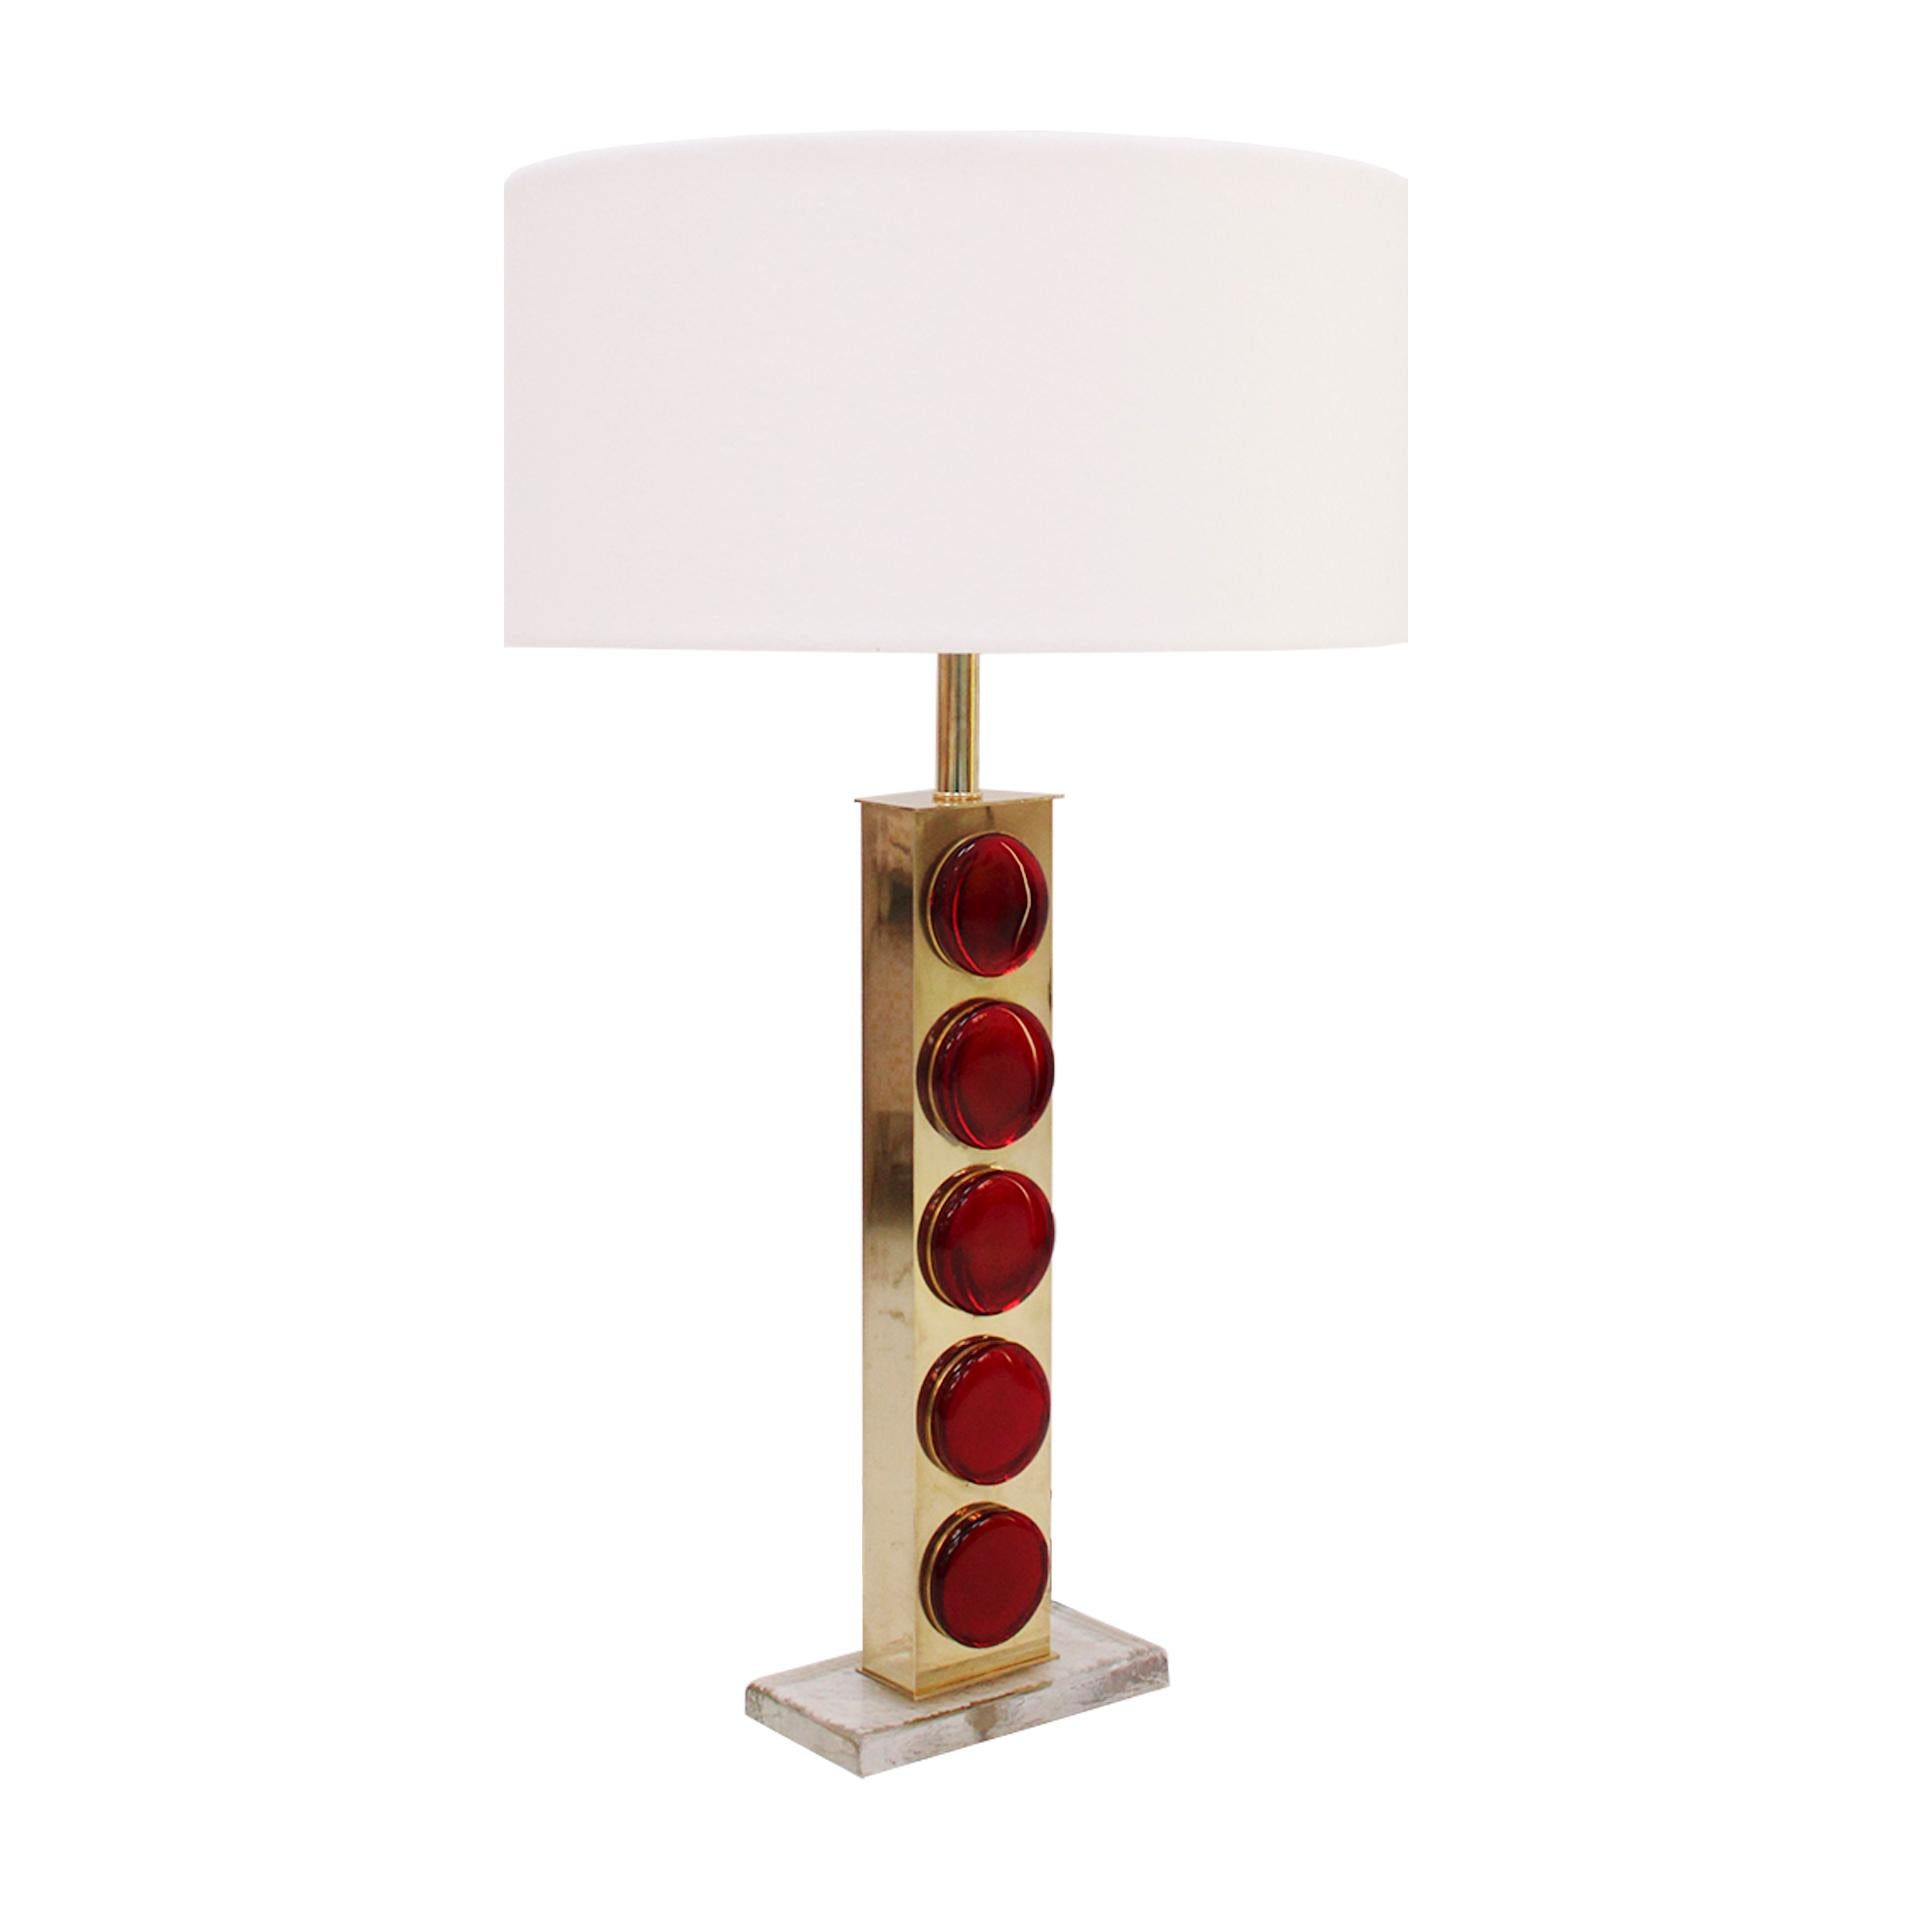 Midcentury style pair of Italian table lamps with brass structure and red murano glass pieces. Circular screens in white bouclé.

This mid-century modern style table lamp showcases a beautiful blend of elegance and retro charm. Its brass structure